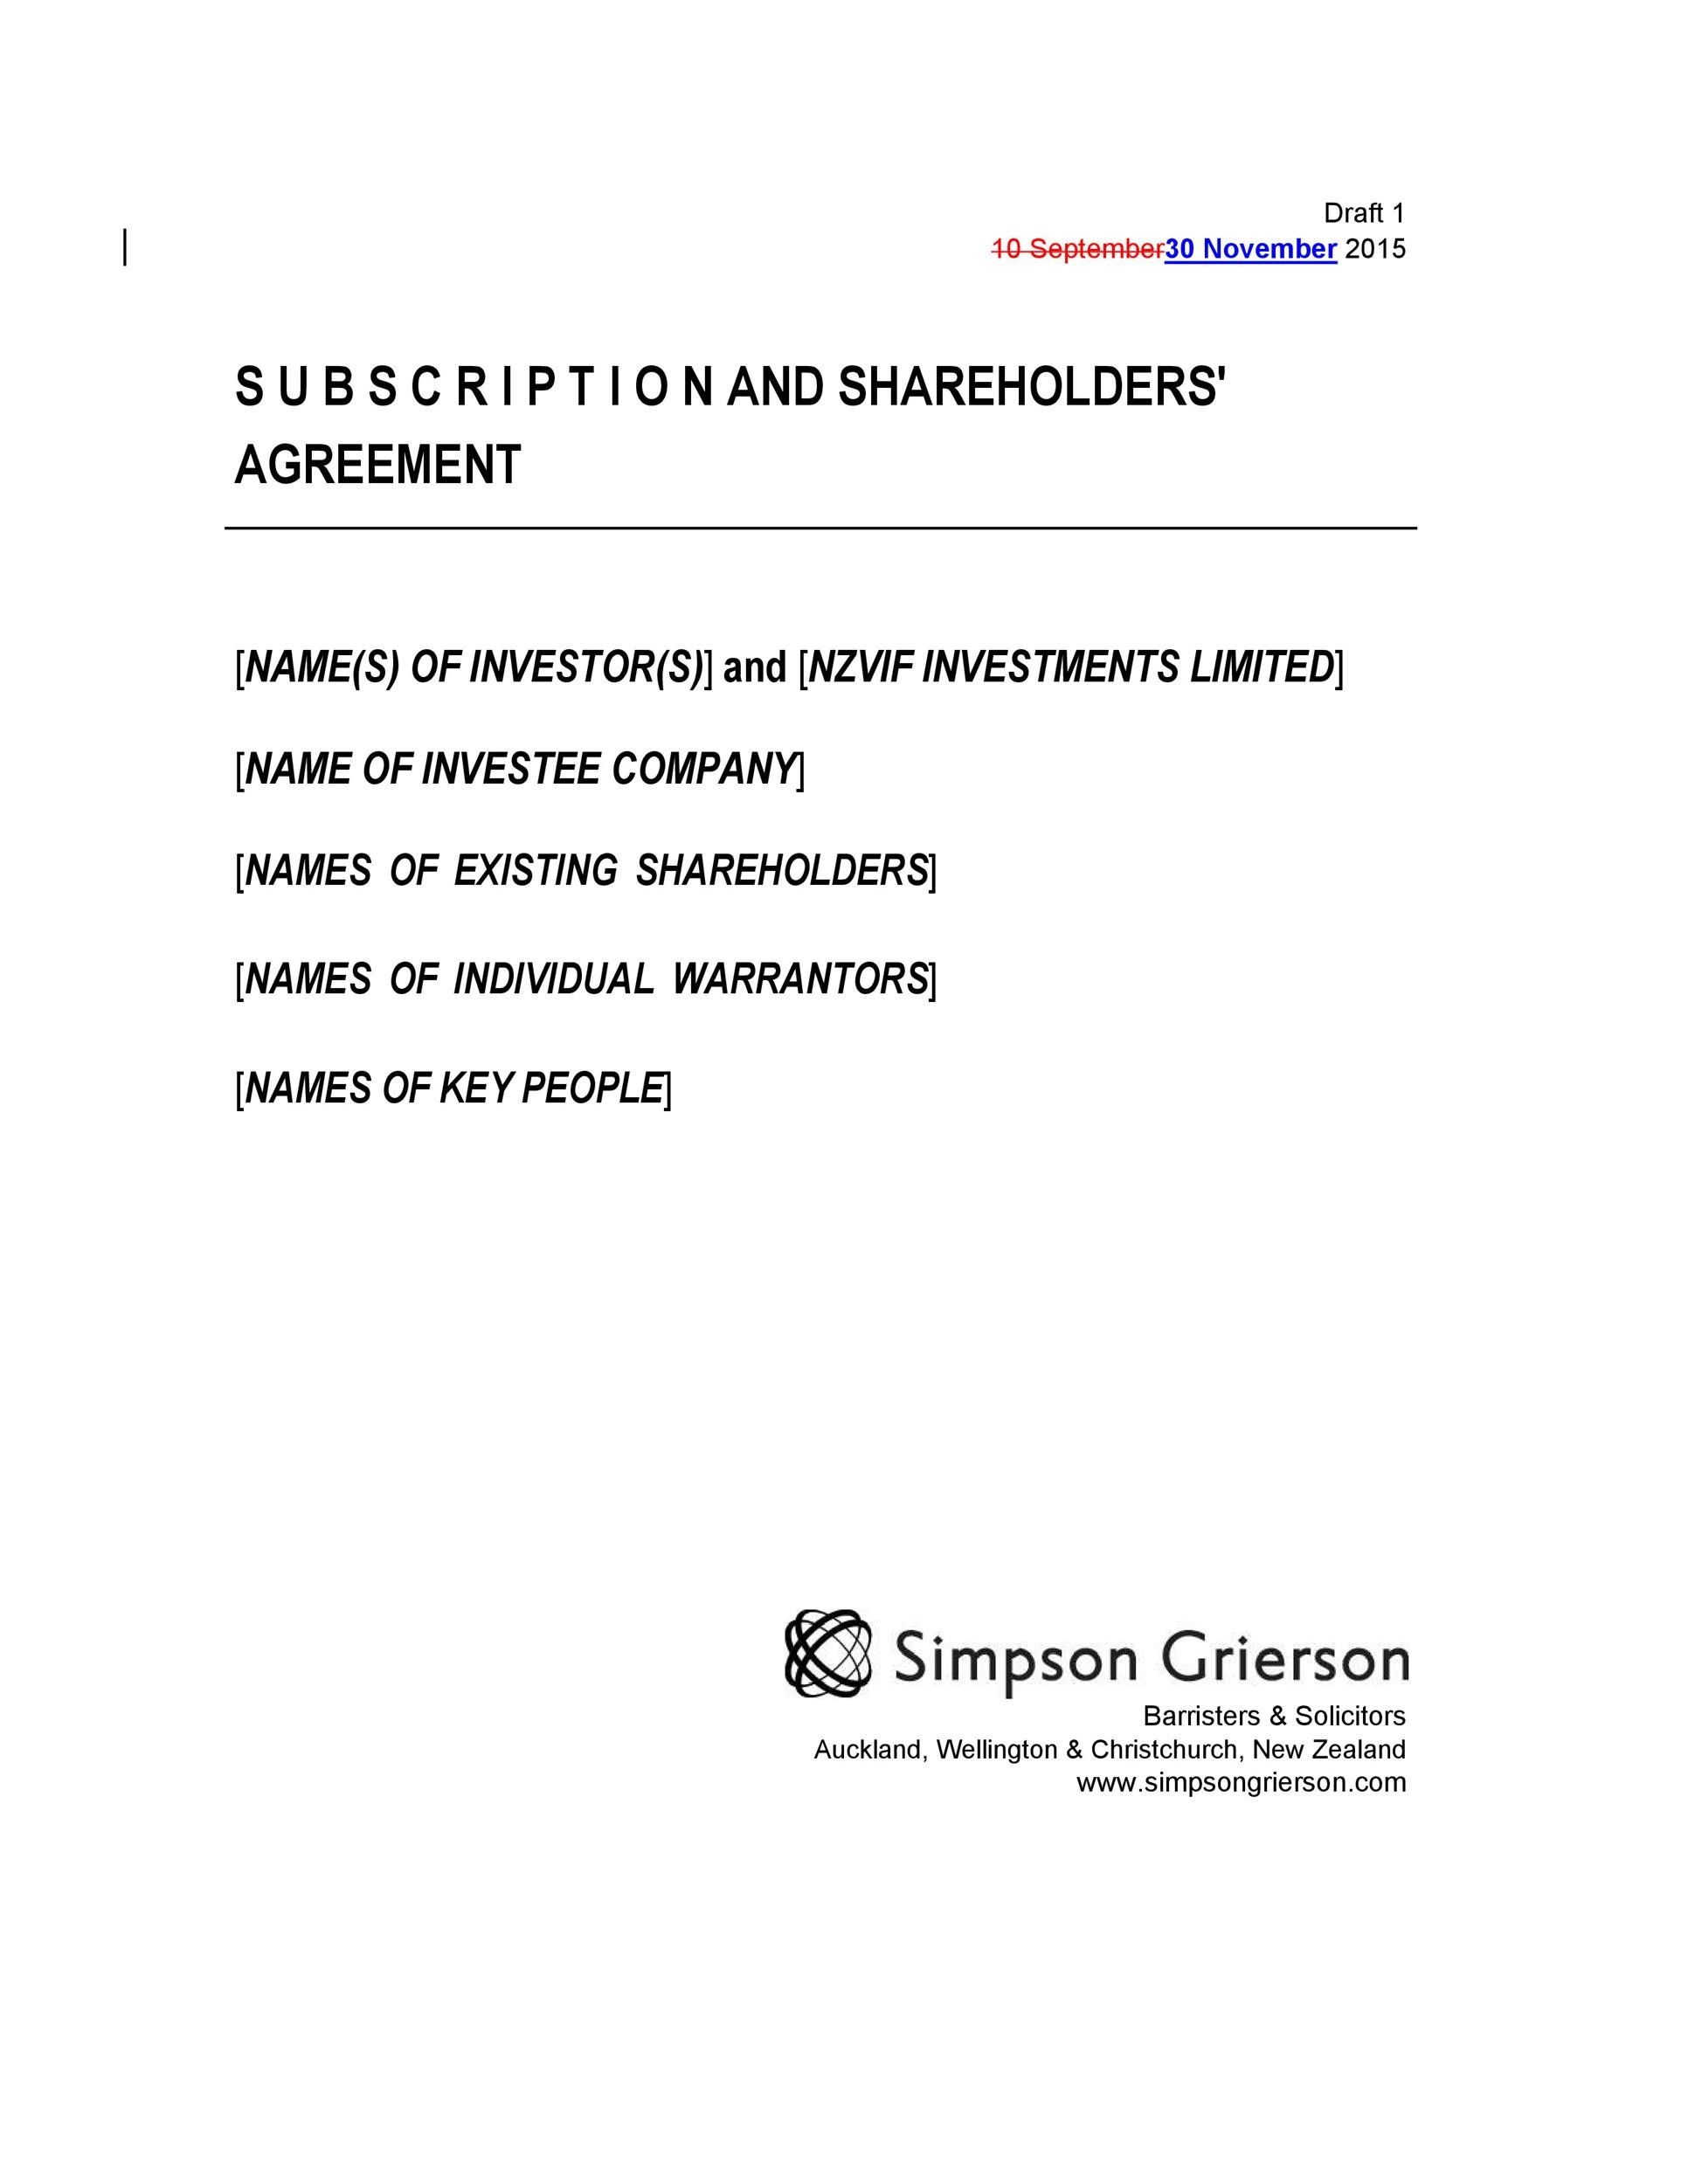 Shareholders Agreement Template For Small Business